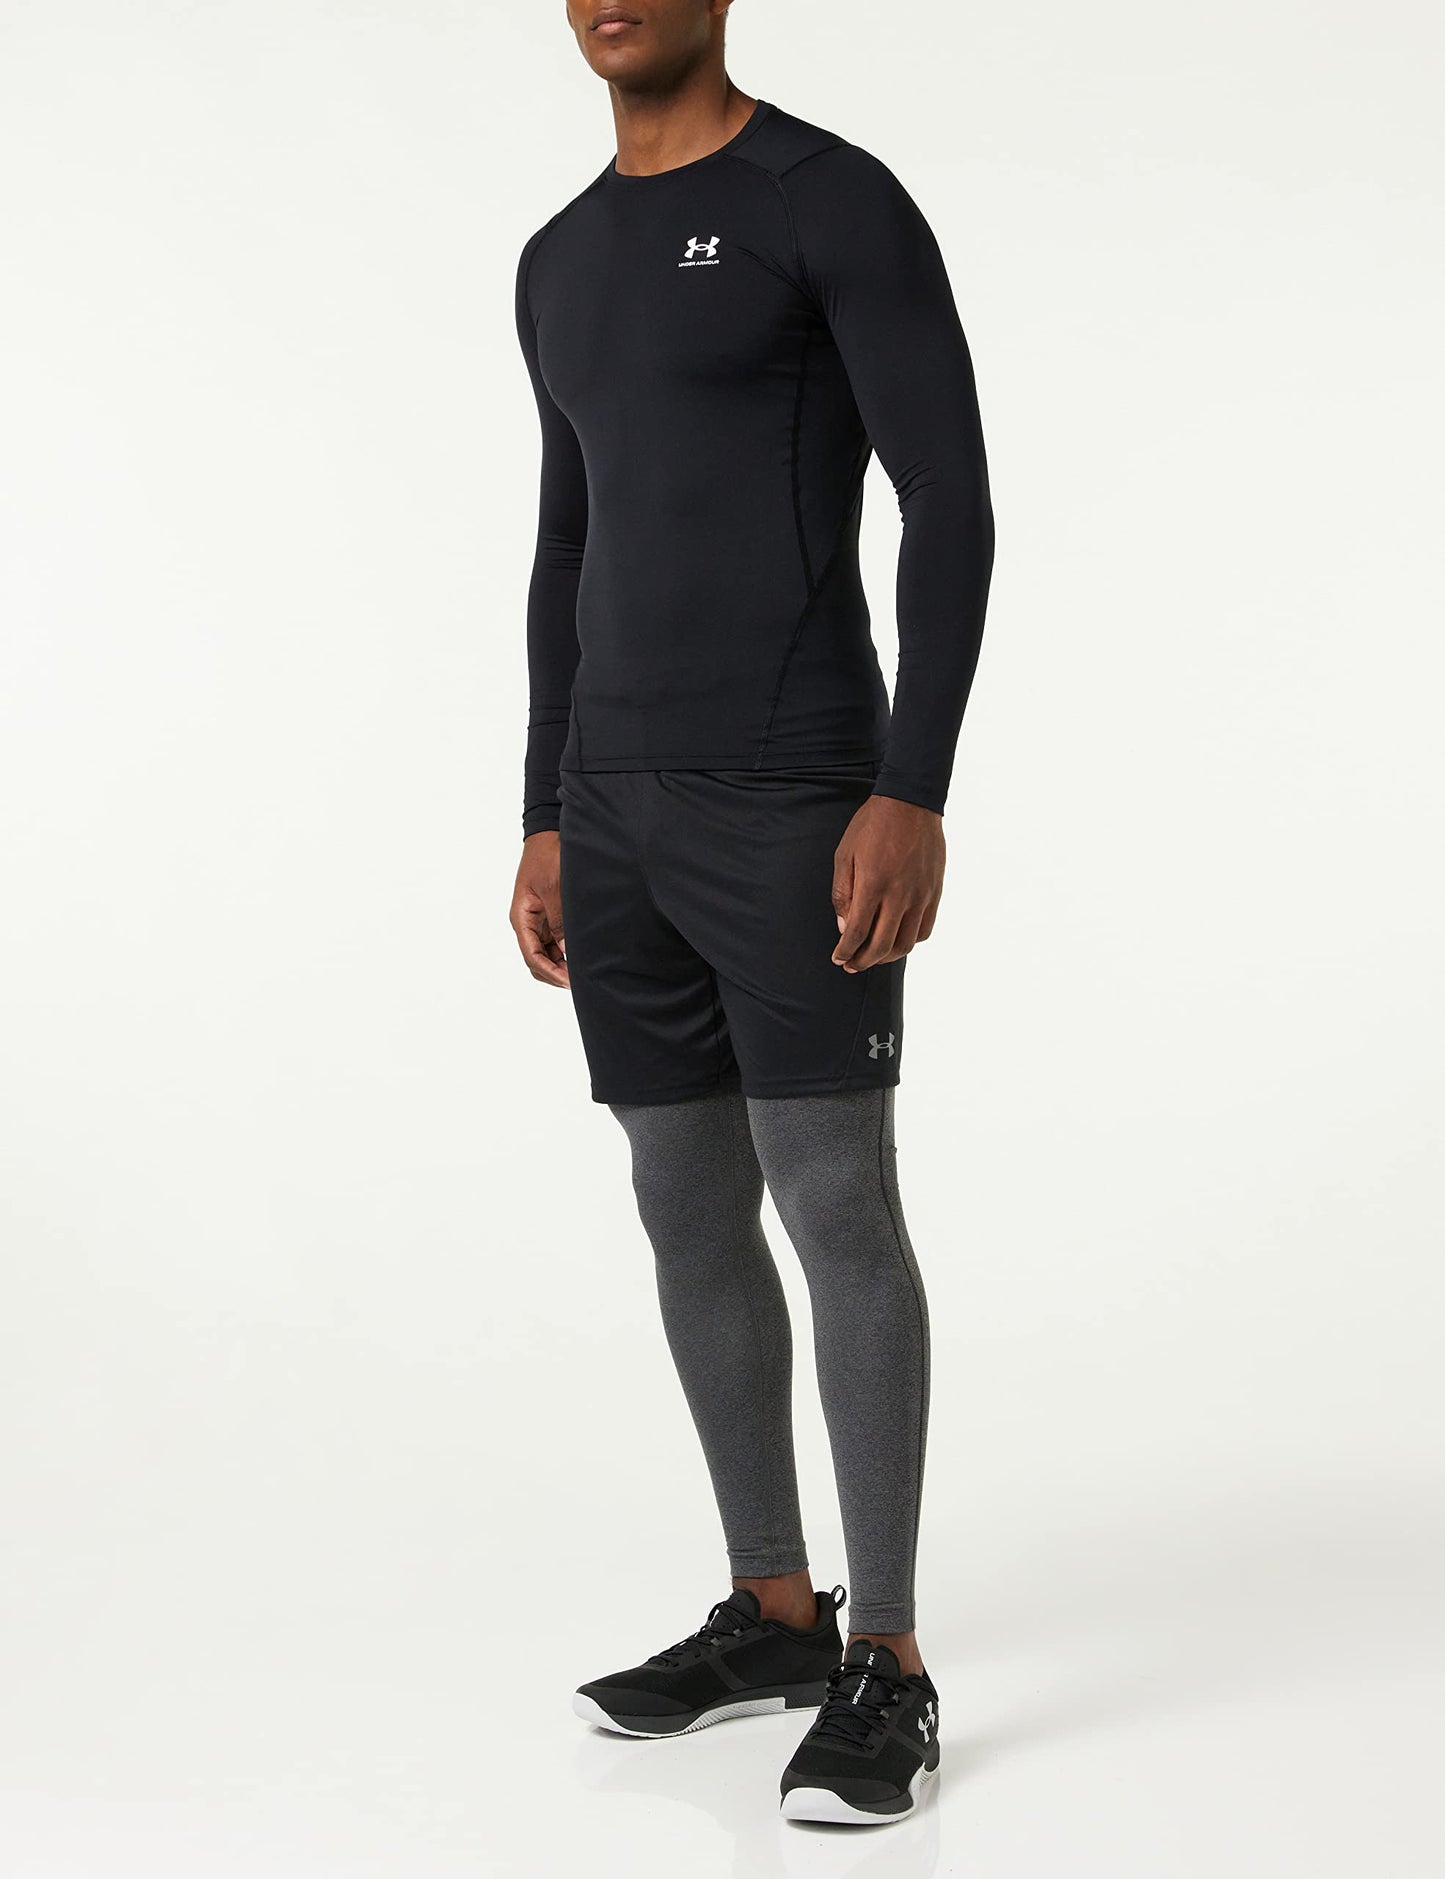 Under Armour Men's Ua Hg Armour Fitted Ls Long-Sleeved Sports t-Shirt for Men, Comfortable and Breathable Gym Clothes